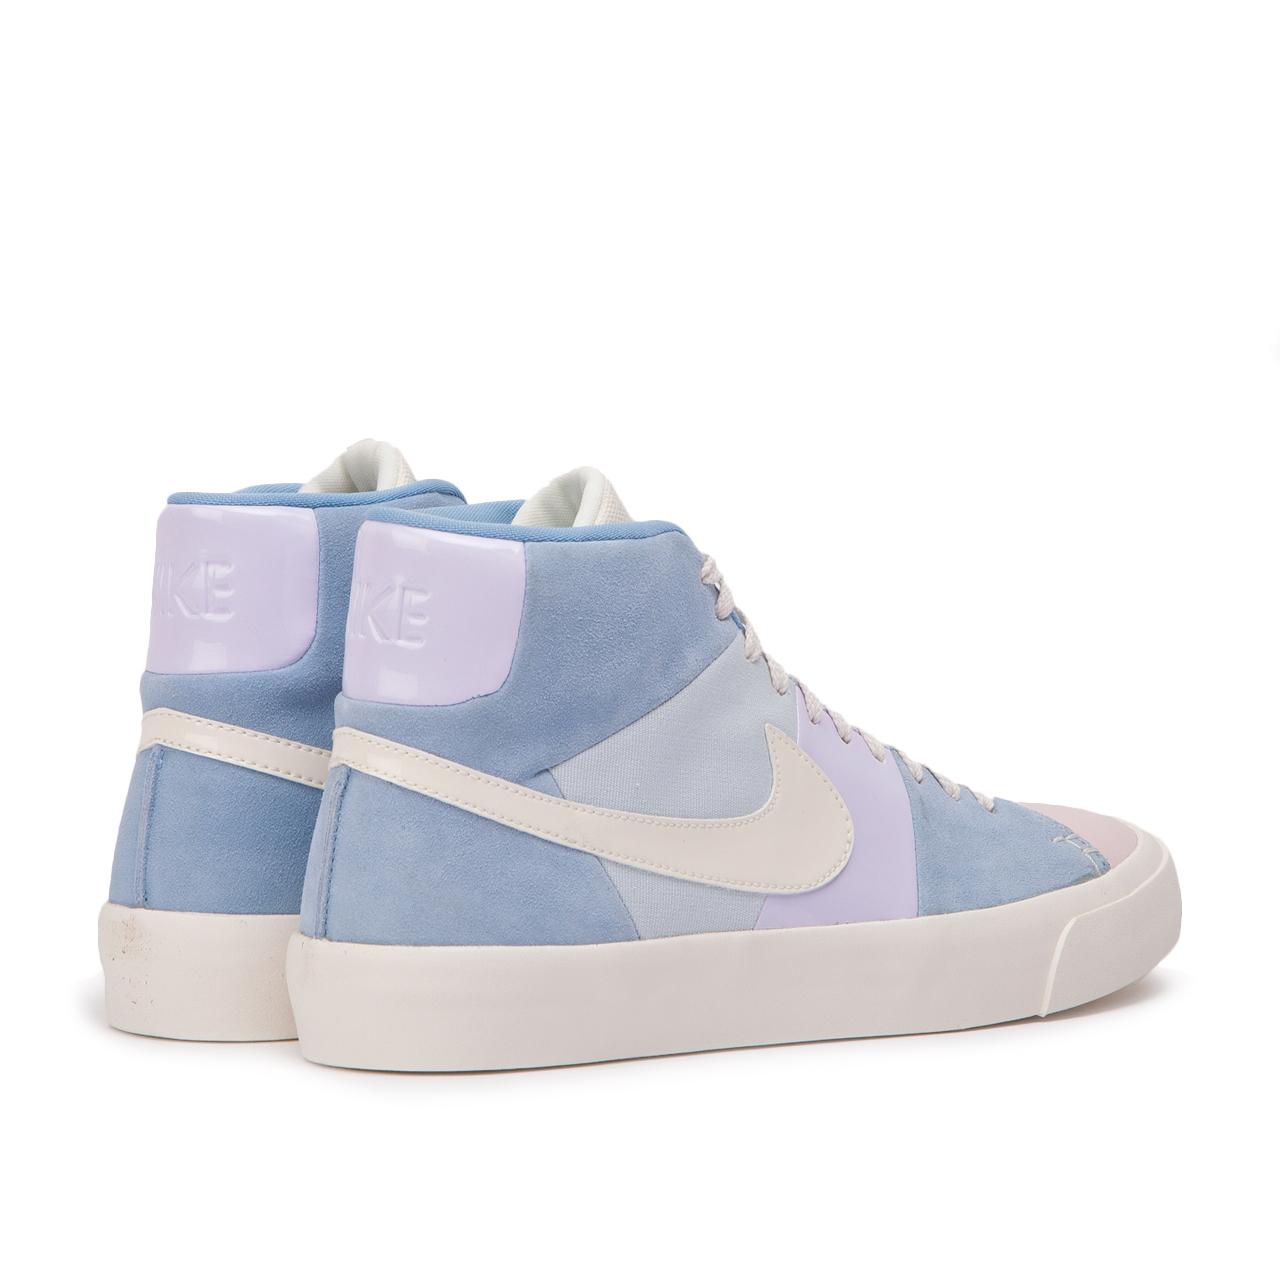 Nike Leather Nike Blazer Royal Easter Qs in Pink for Men - Lyst